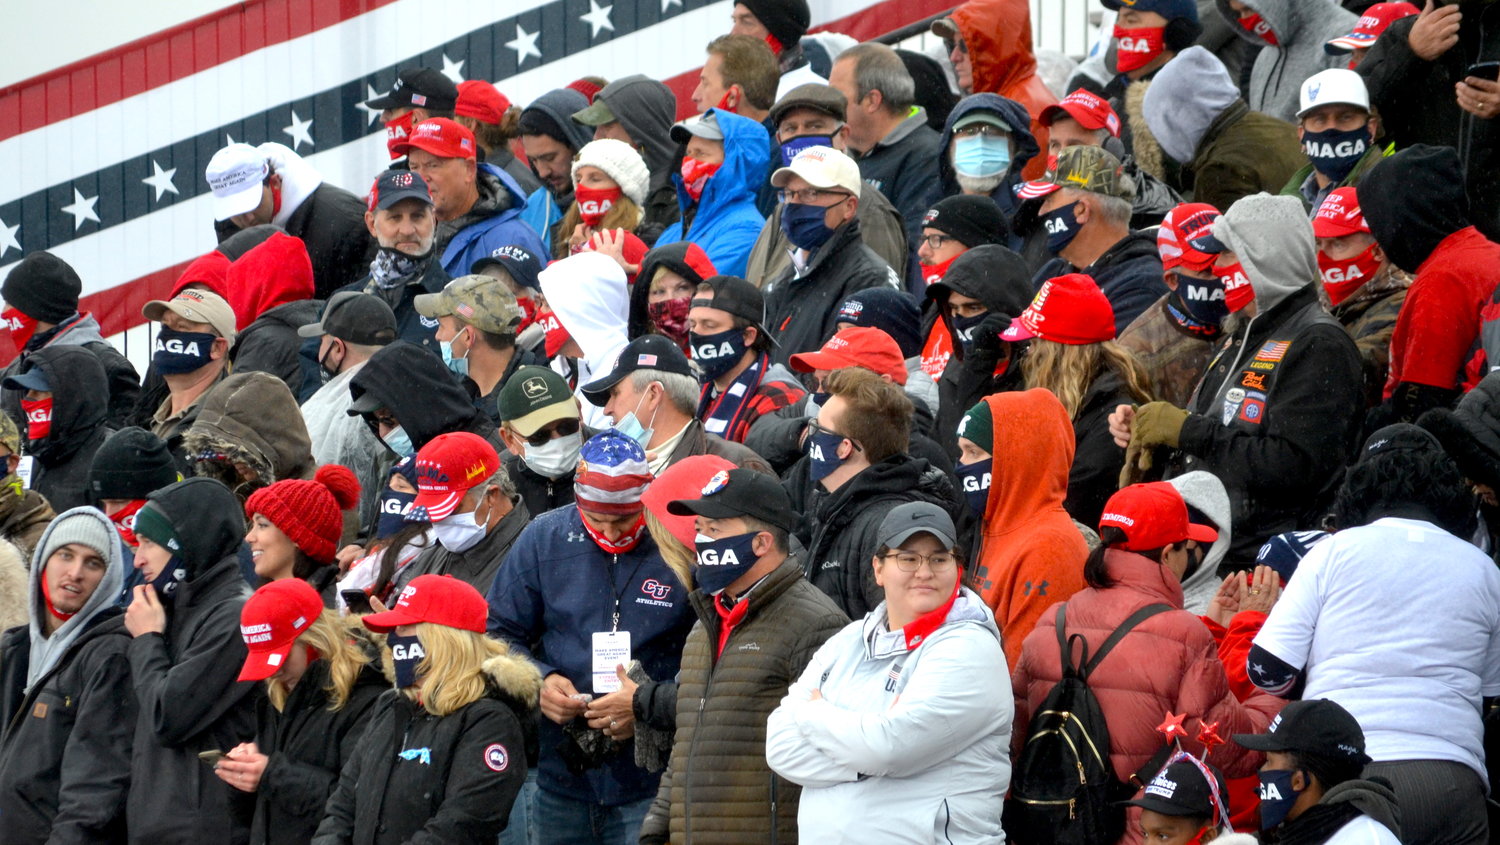 Attendees wait in cold, rainy weather for the start of the Make America Great Again Victory Rally at Capitol Region International Airport.